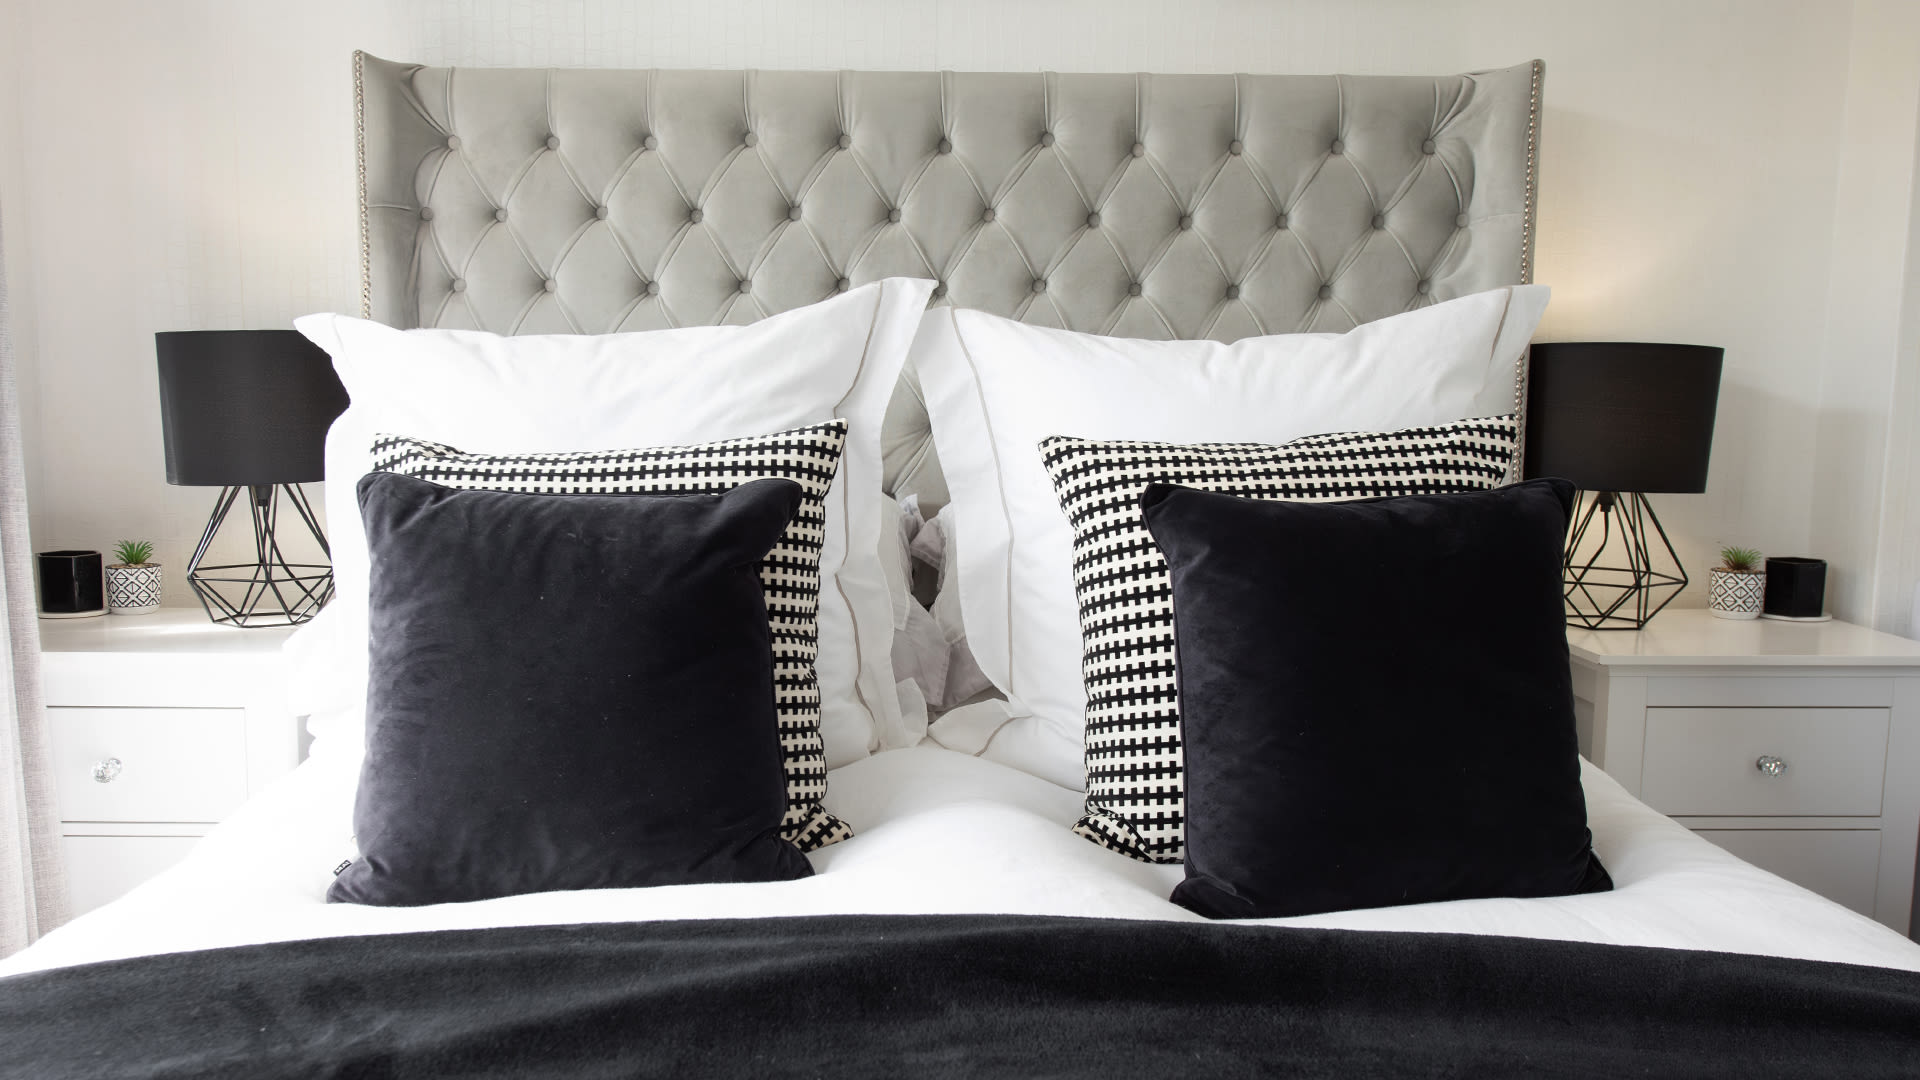 My cheap hack gives flat Ikea pillow inserts a boost for less than $8